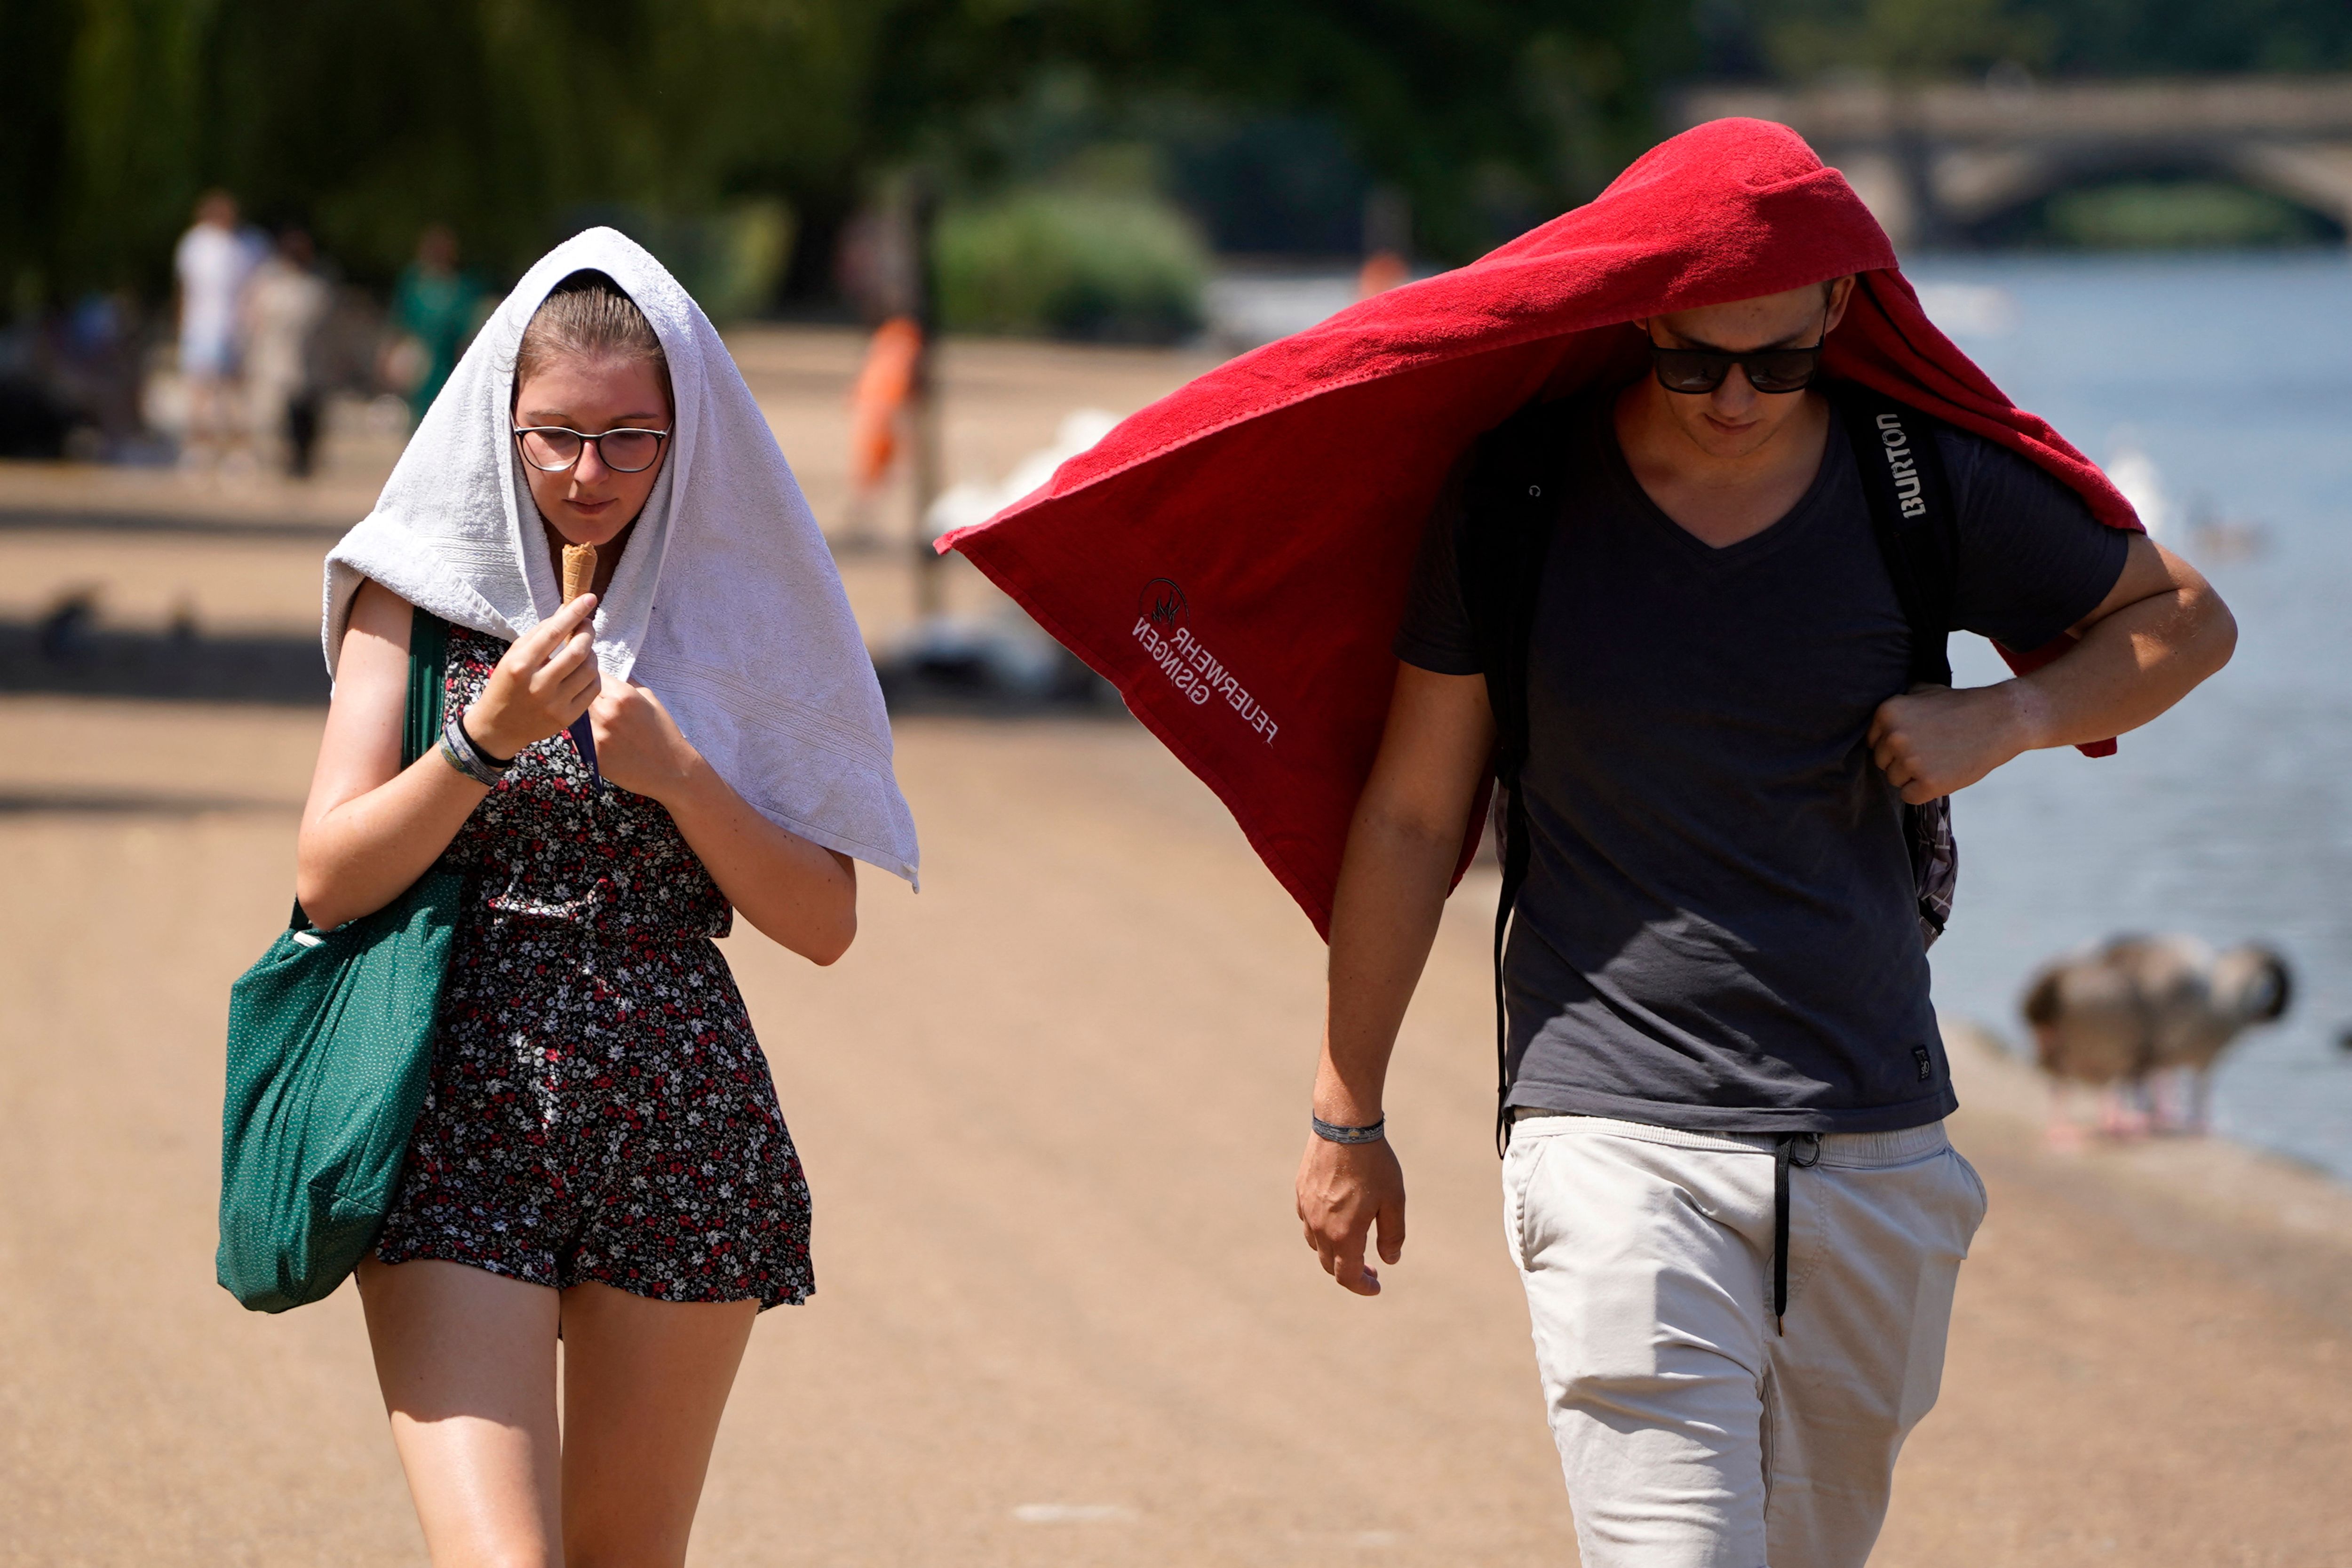 Temperatures in the UK rose above 40 degrees Celsius&nbsp;for the first time on July 19.